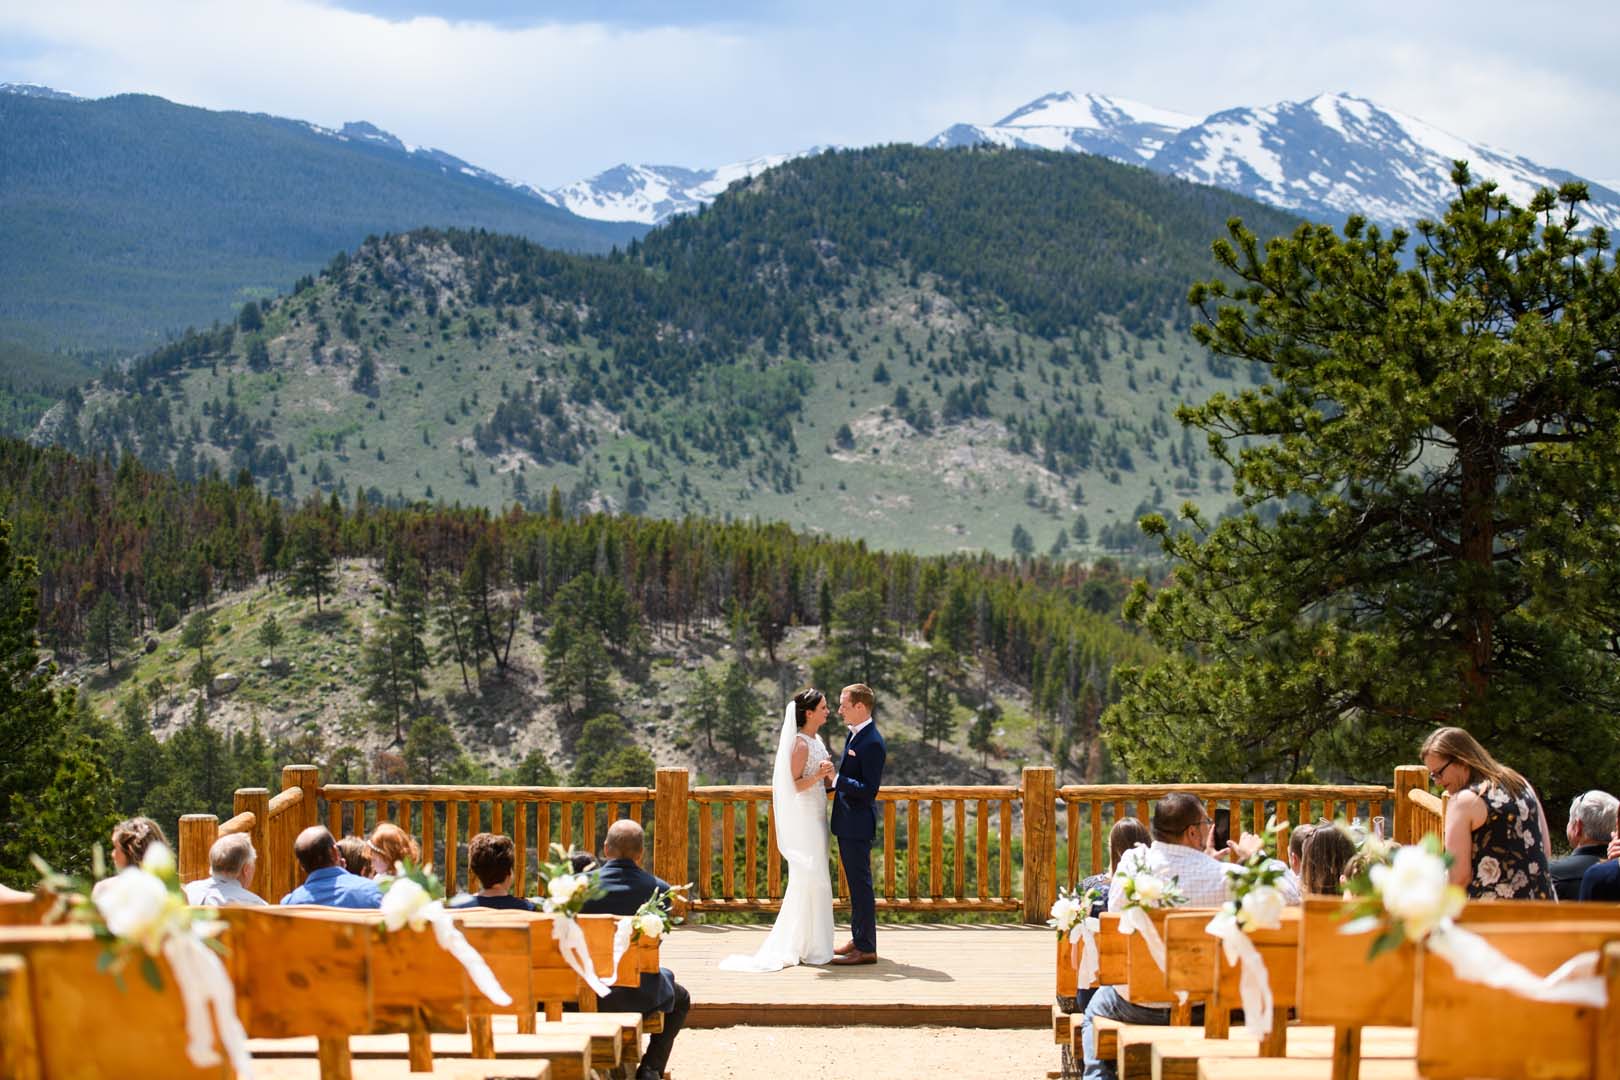 Couple getting married outside in front of mountains